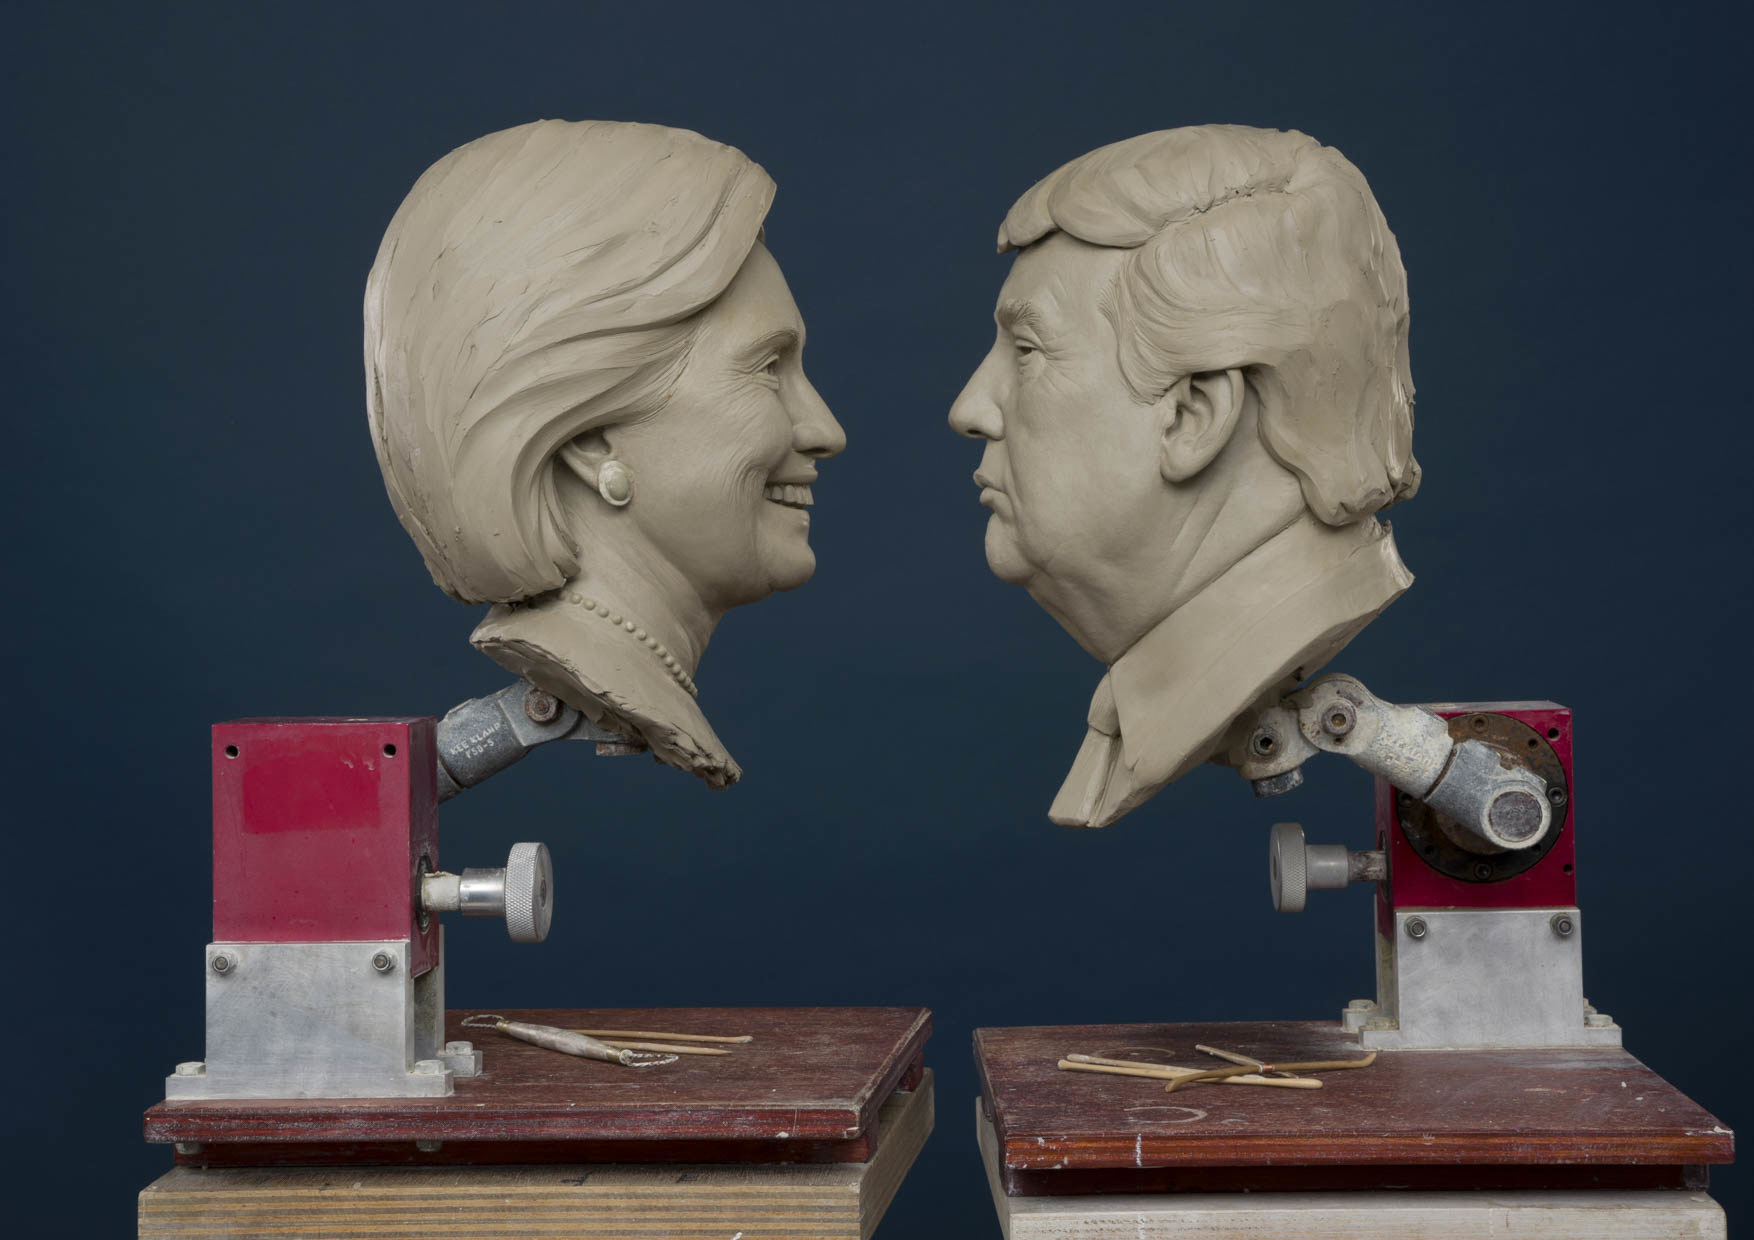 Madame Tussauds Washington, DC shares first photo of Clinton and Trump&apos;s clay head molds in the lead up to November&apos;s 2016 Election. (PRNewsFoto/Madame Tussauds Washington, DC)